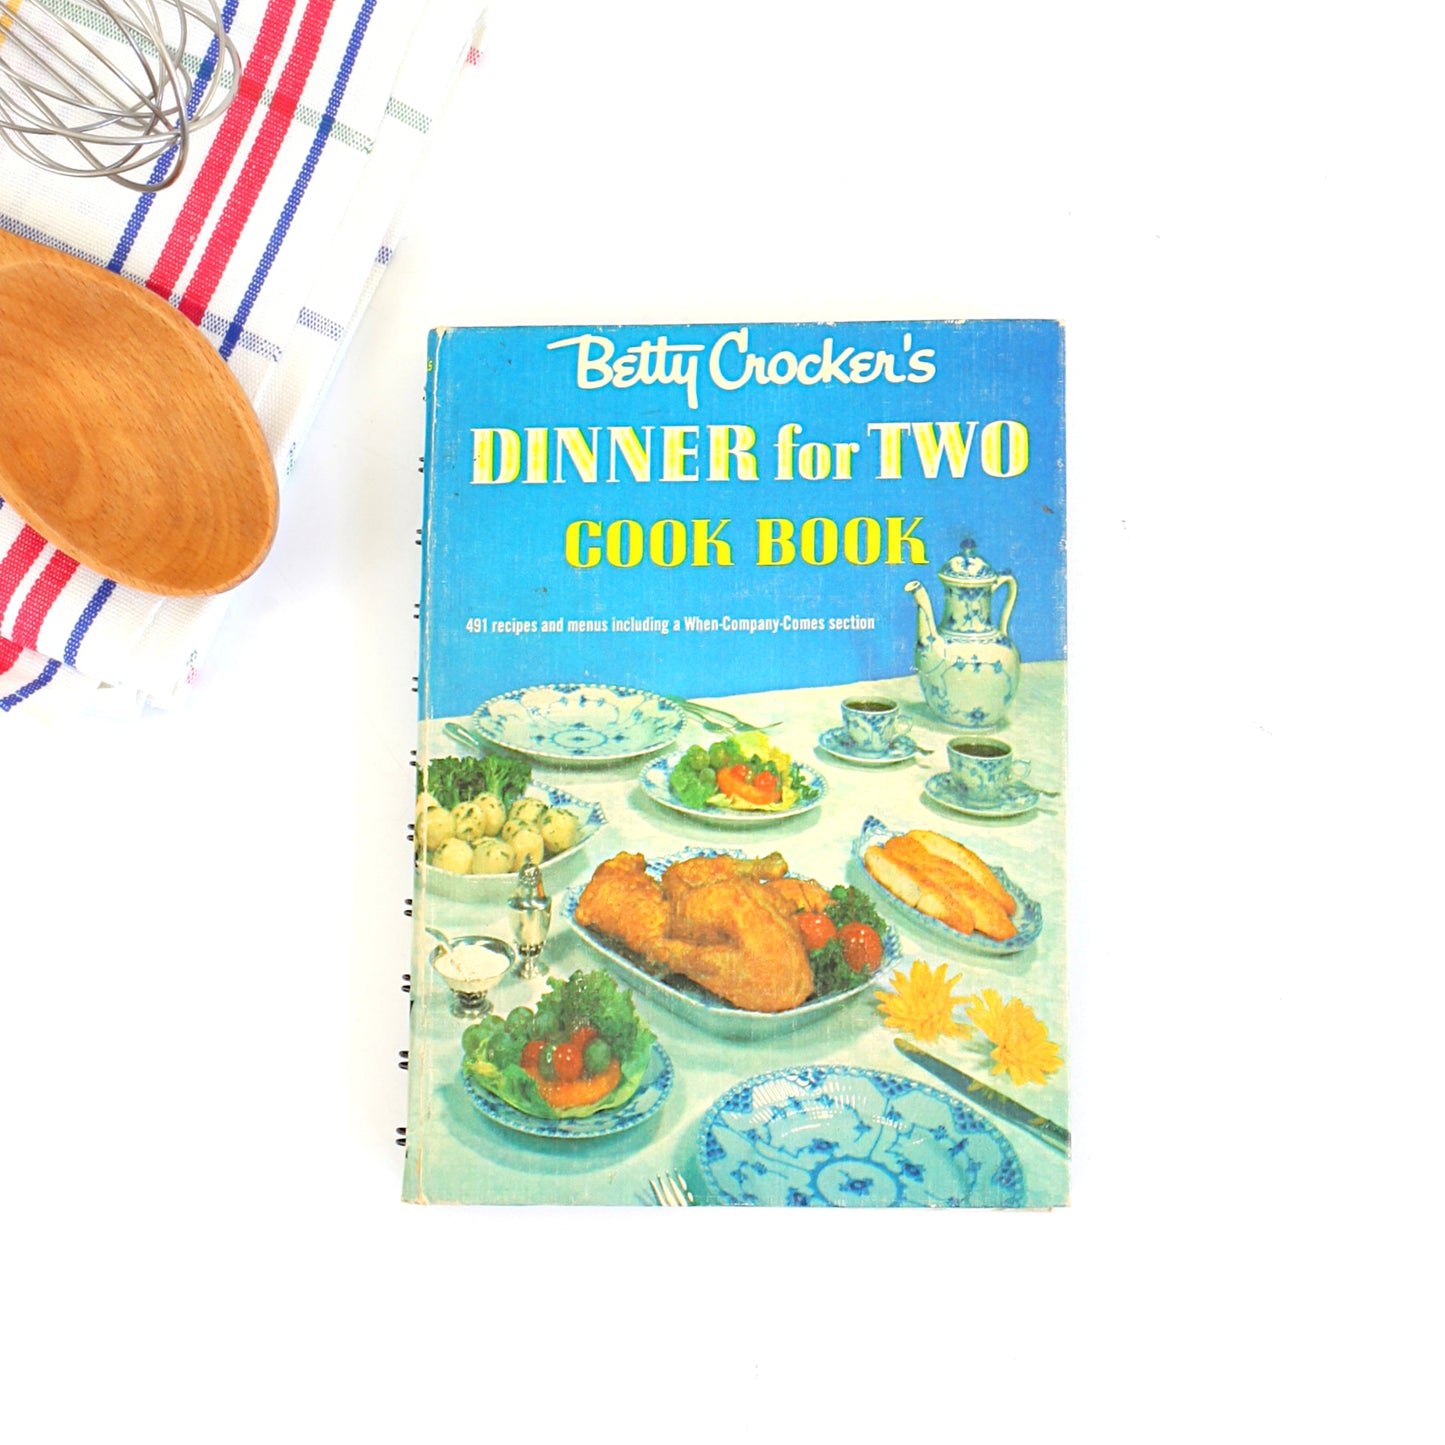 Betty Crocker's Dinner for Two Cook Book / Vintage 1958 Spiral Bound Cookbook *Free US Shipping*